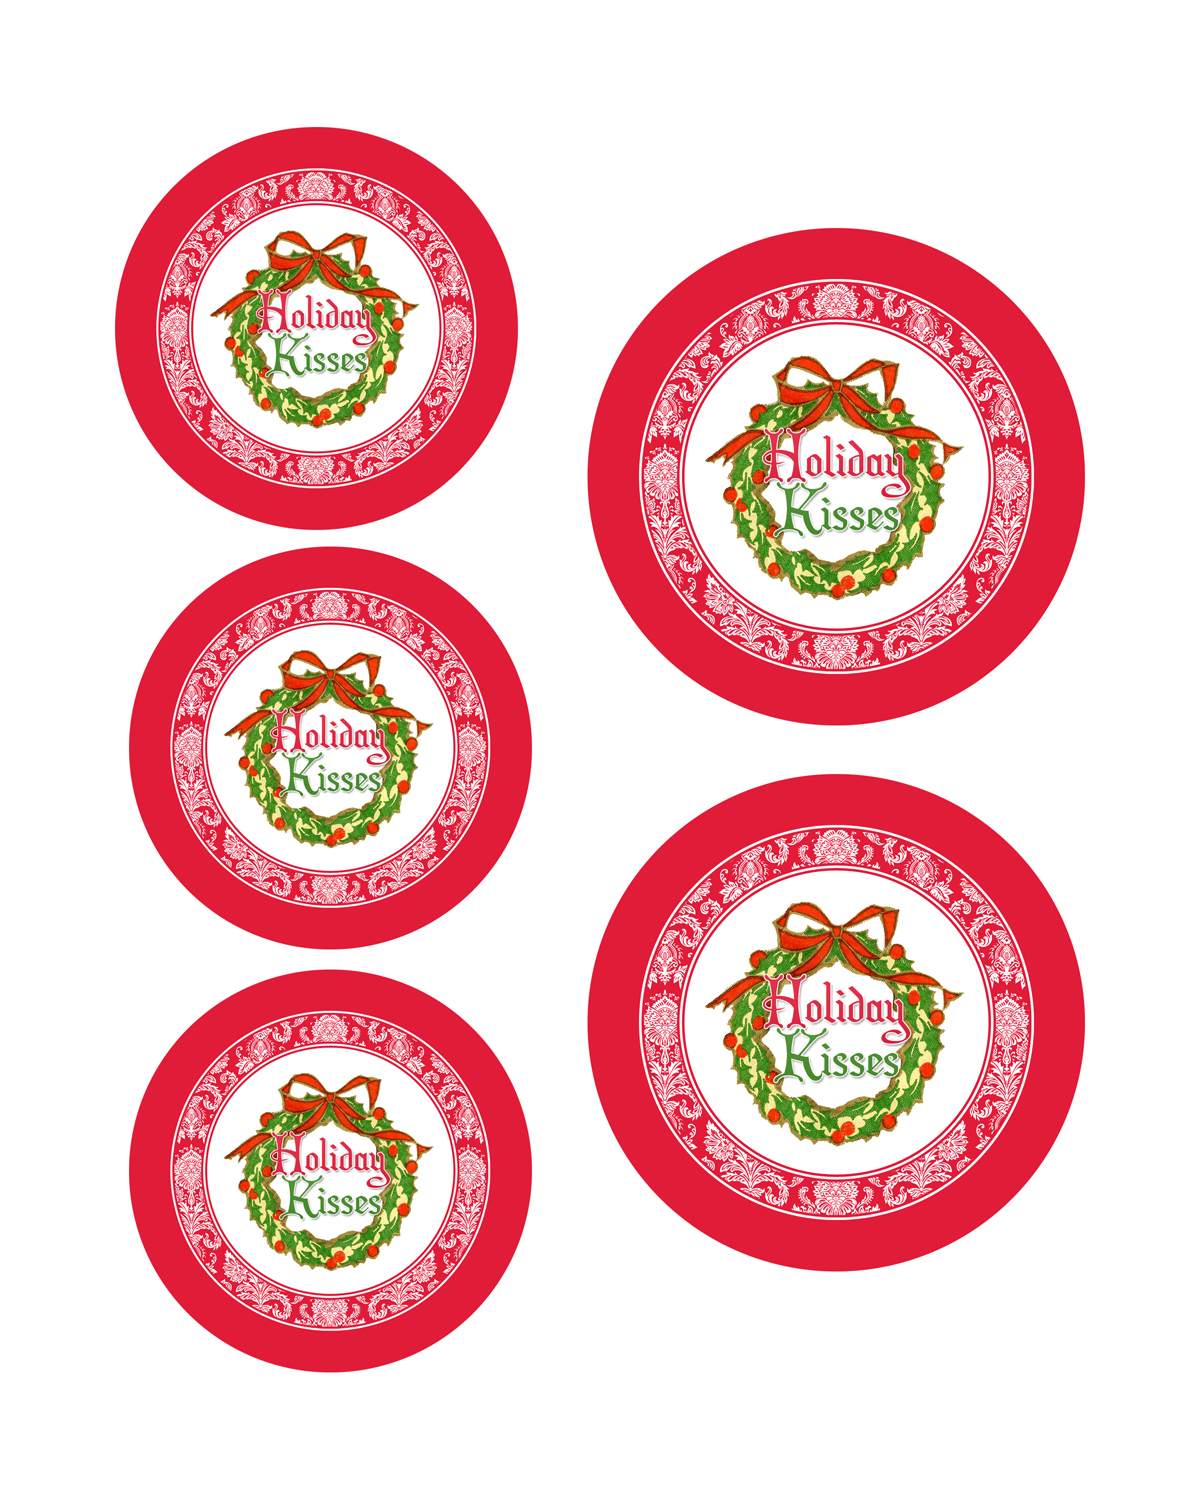 Printable Candy Jar Labels for the Holidays - The Graphics Fairy